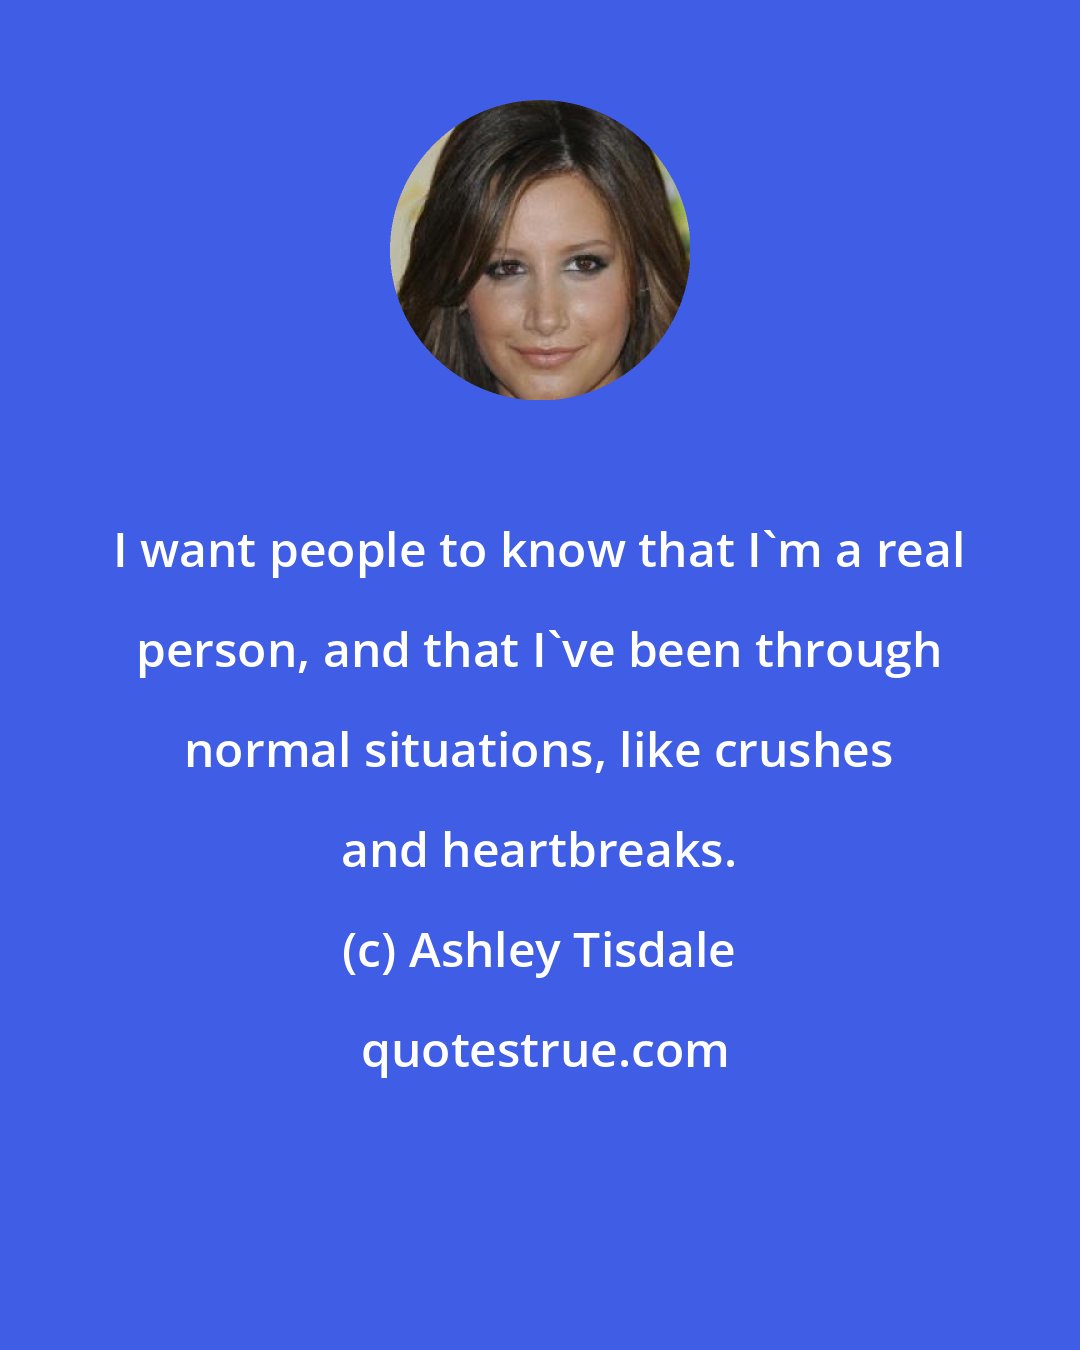 Ashley Tisdale: I want people to know that I'm a real person, and that I've been through normal situations, like crushes and heartbreaks.